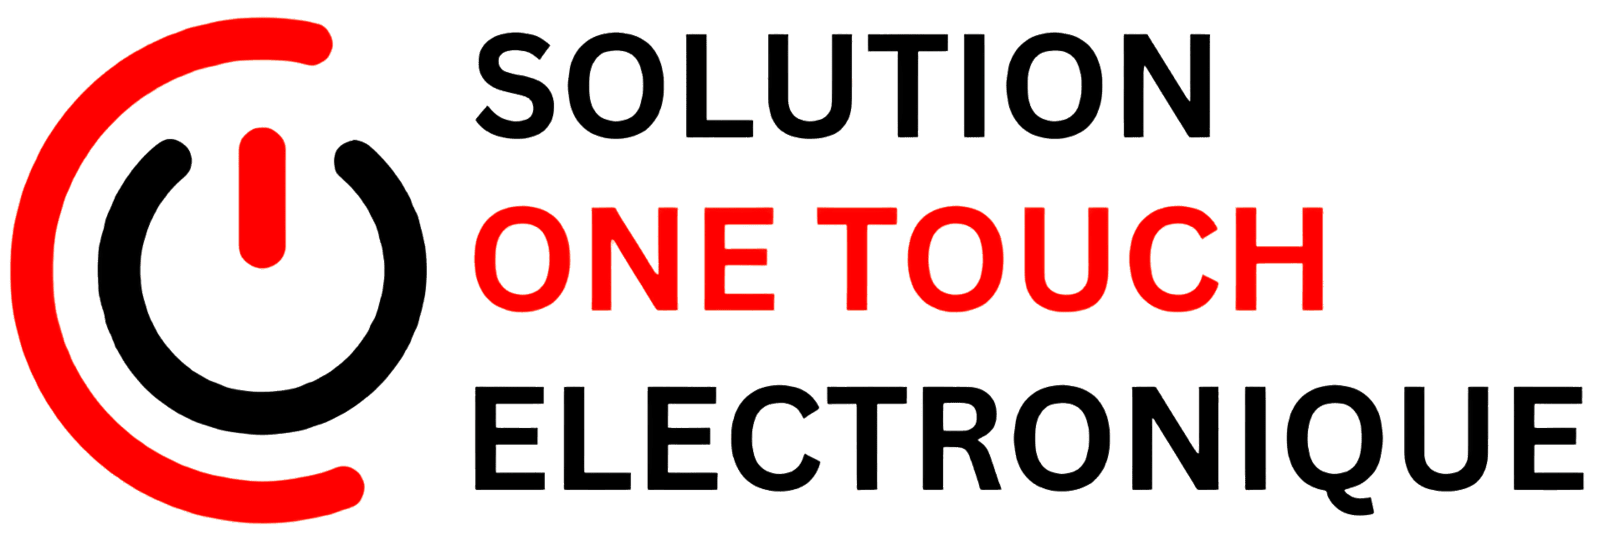 SOLUTION ONE TOUCH ELECTRONIC